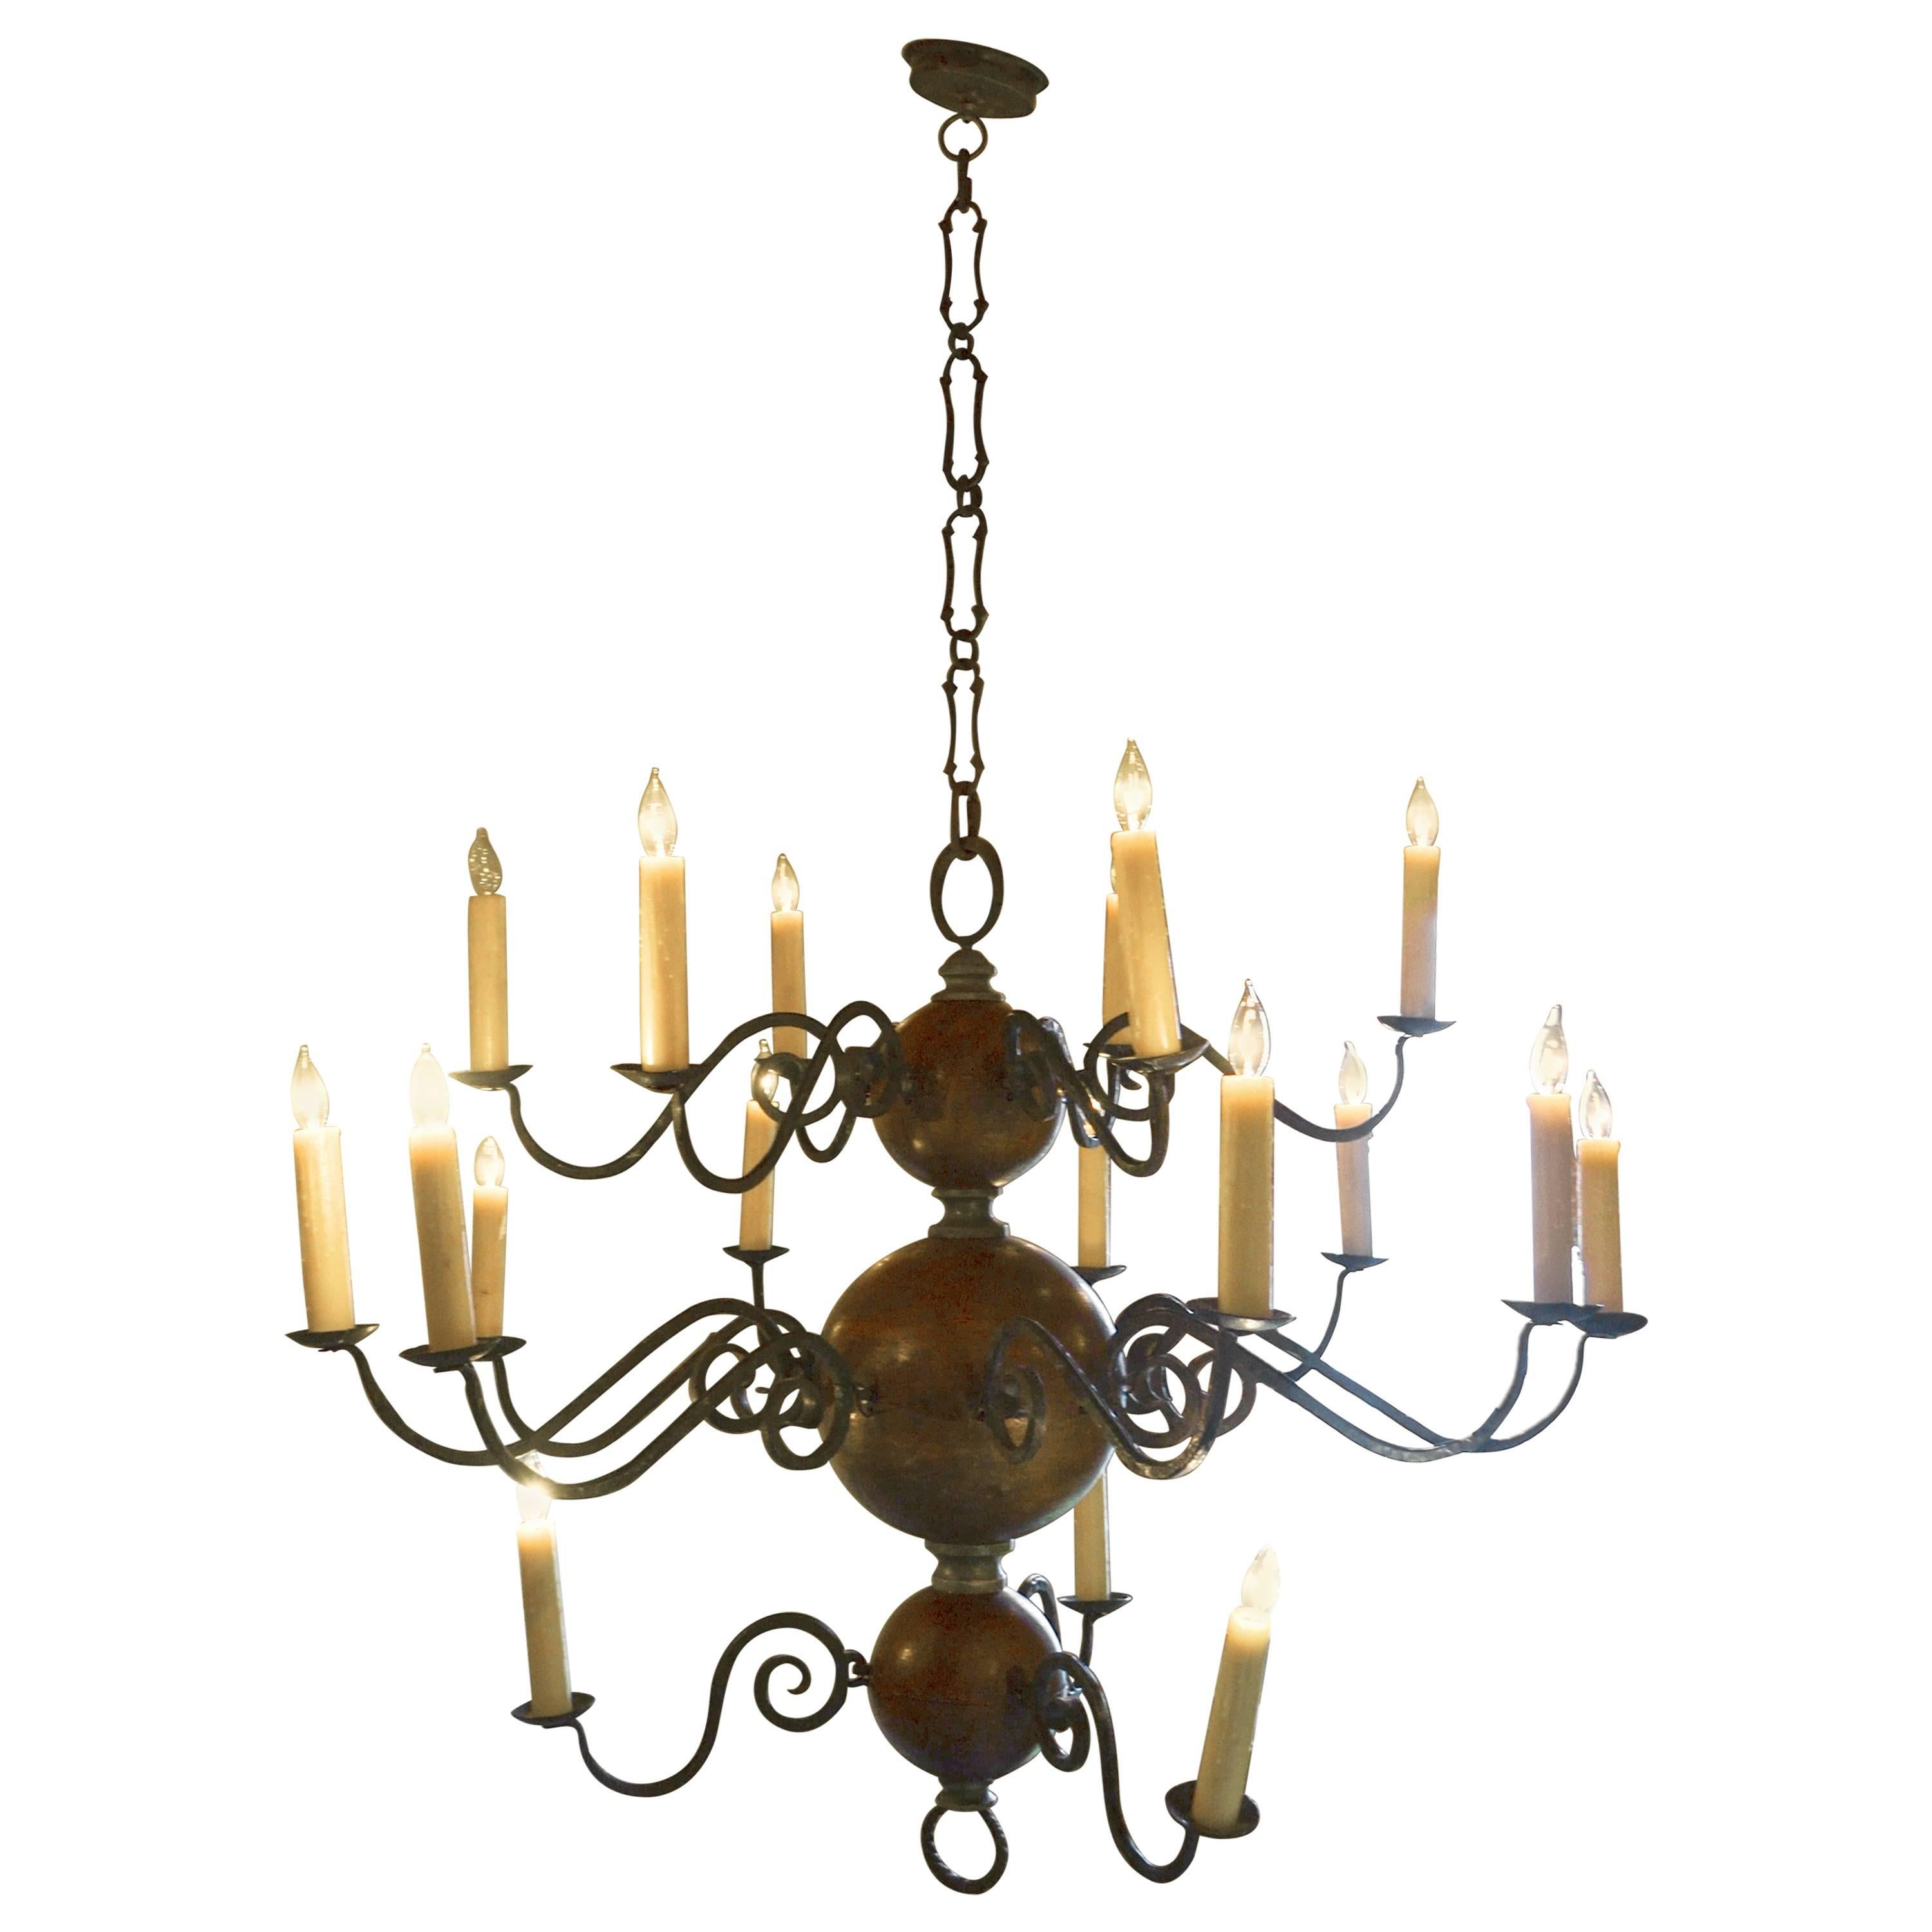 Dutch Iron and Wood Baroque Style Chandelier, circa 19th Century